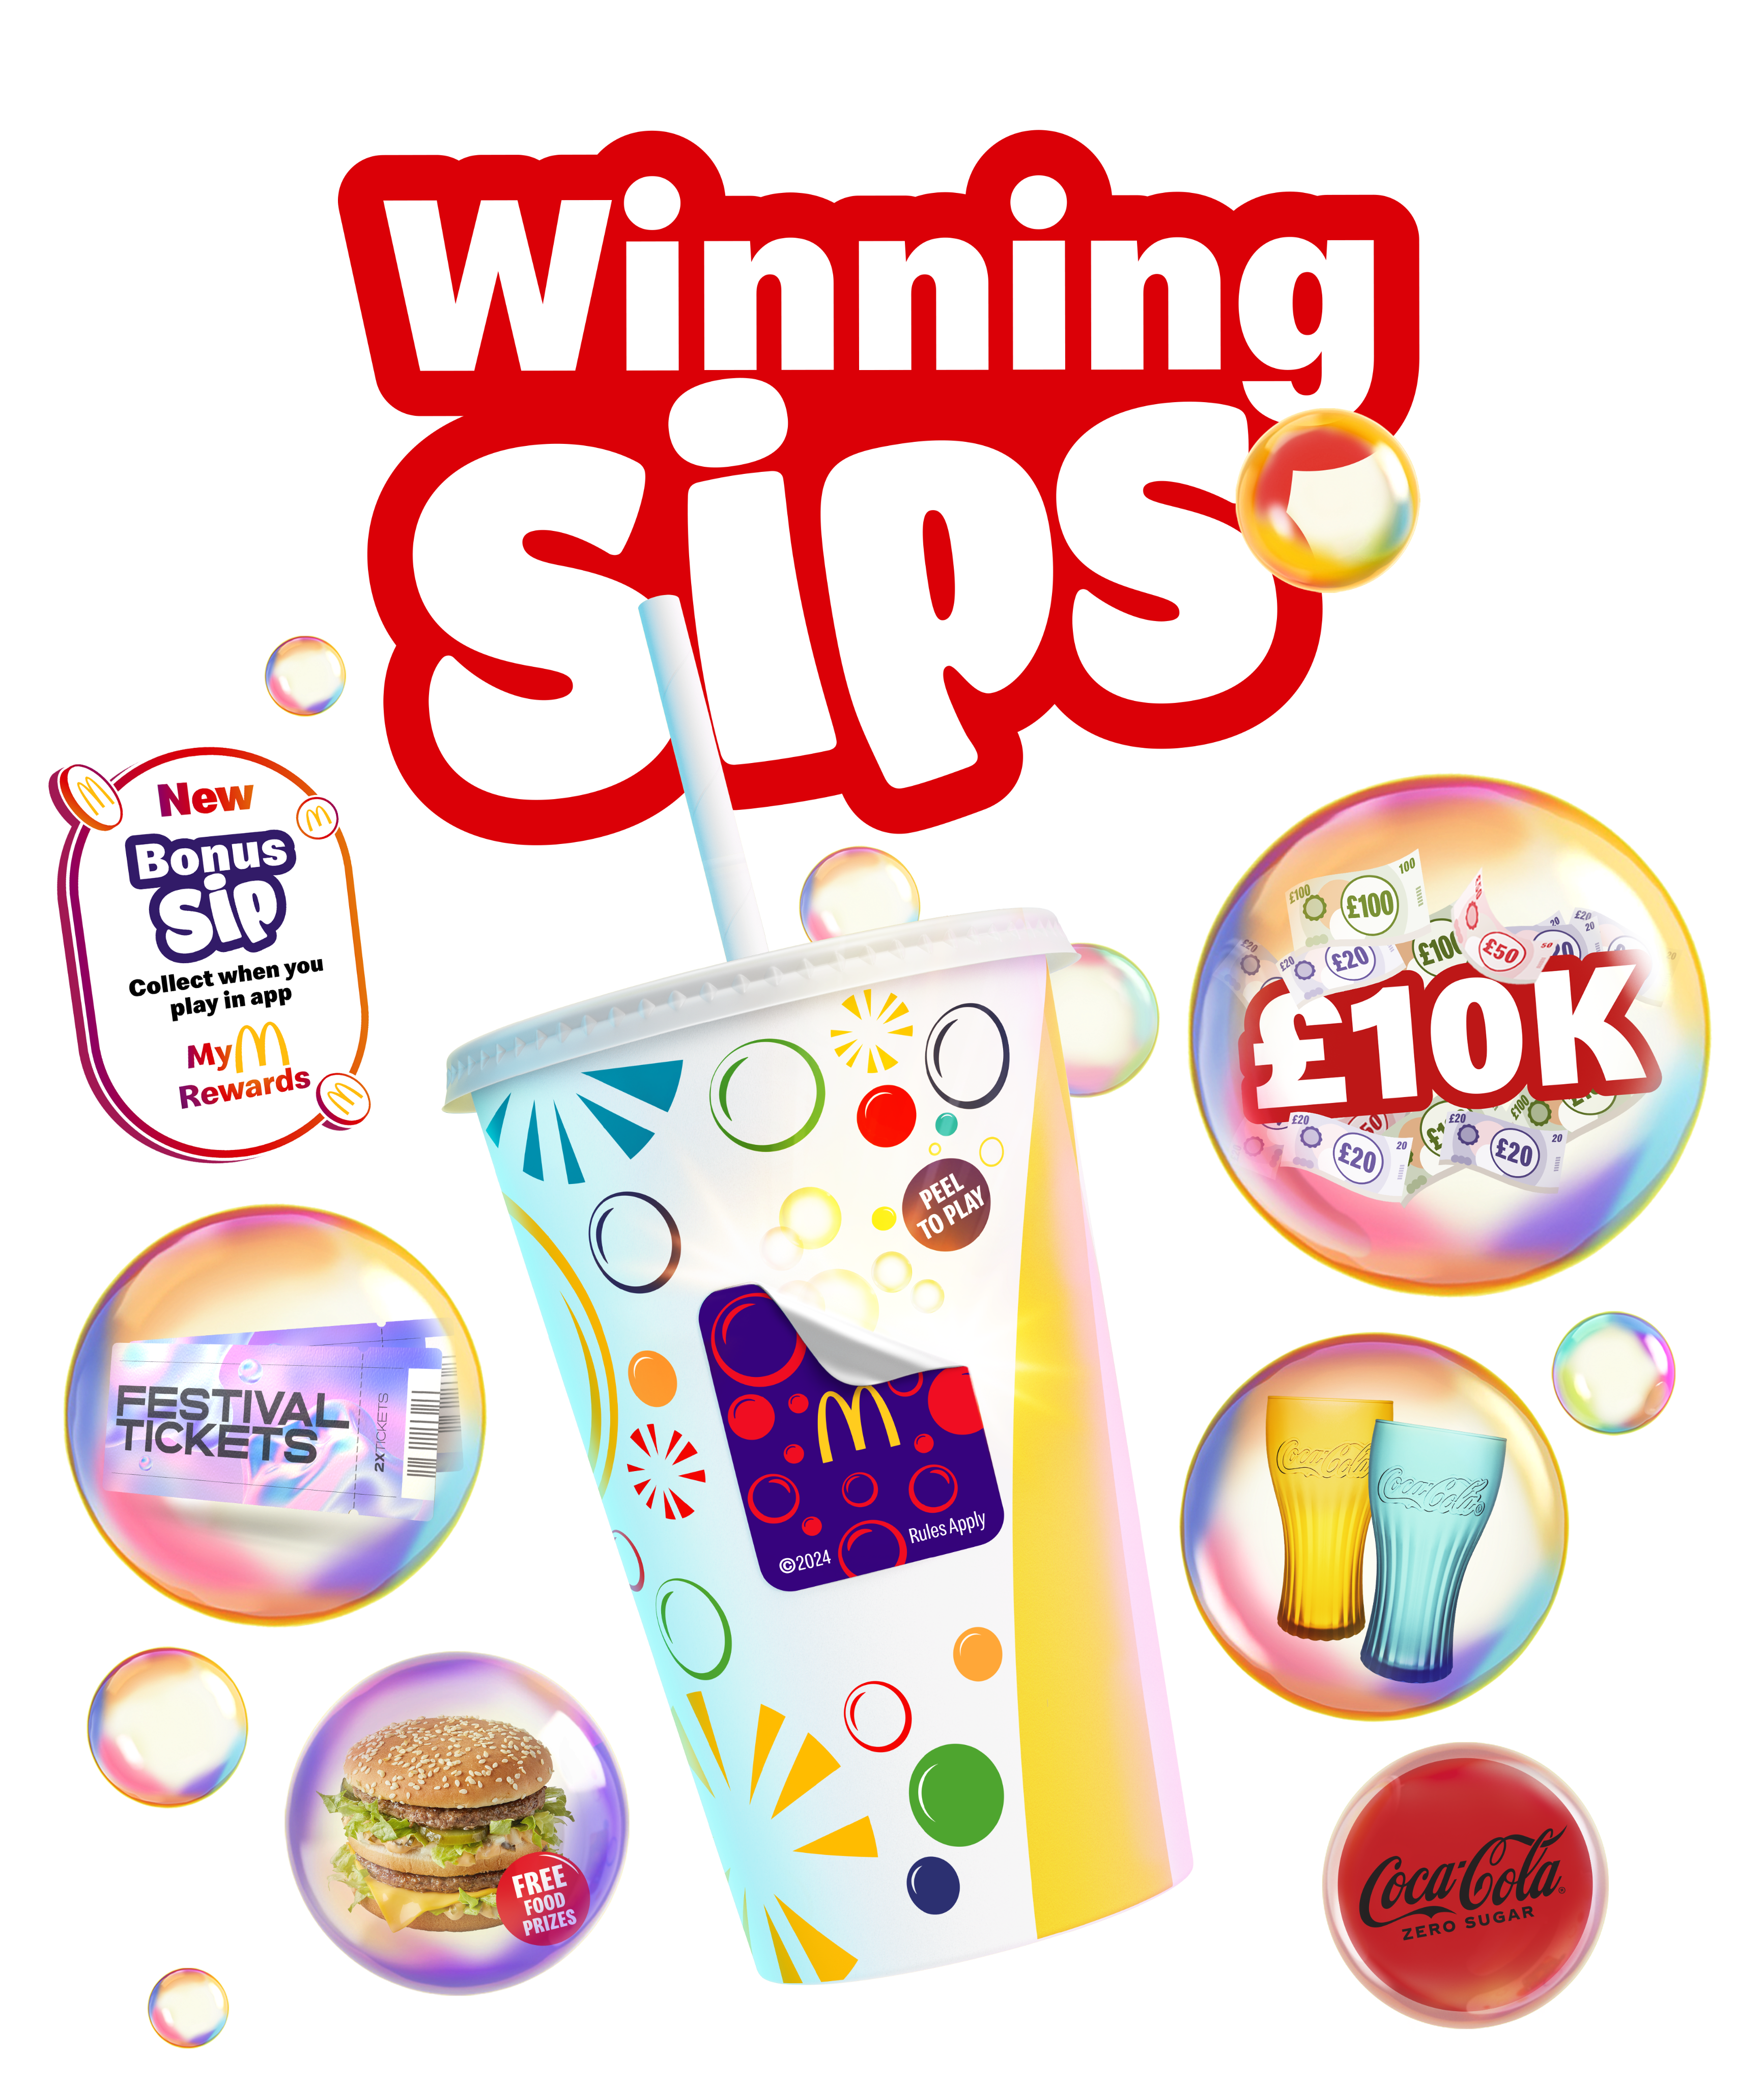 The Winning Sips logo surrounded by some of the potential prizes, such as 10 thousand pounds cash, coloured coca cola drinking glasses, free coca cola drinks, free Big Mac burgers, festival tickets, or bonus sips